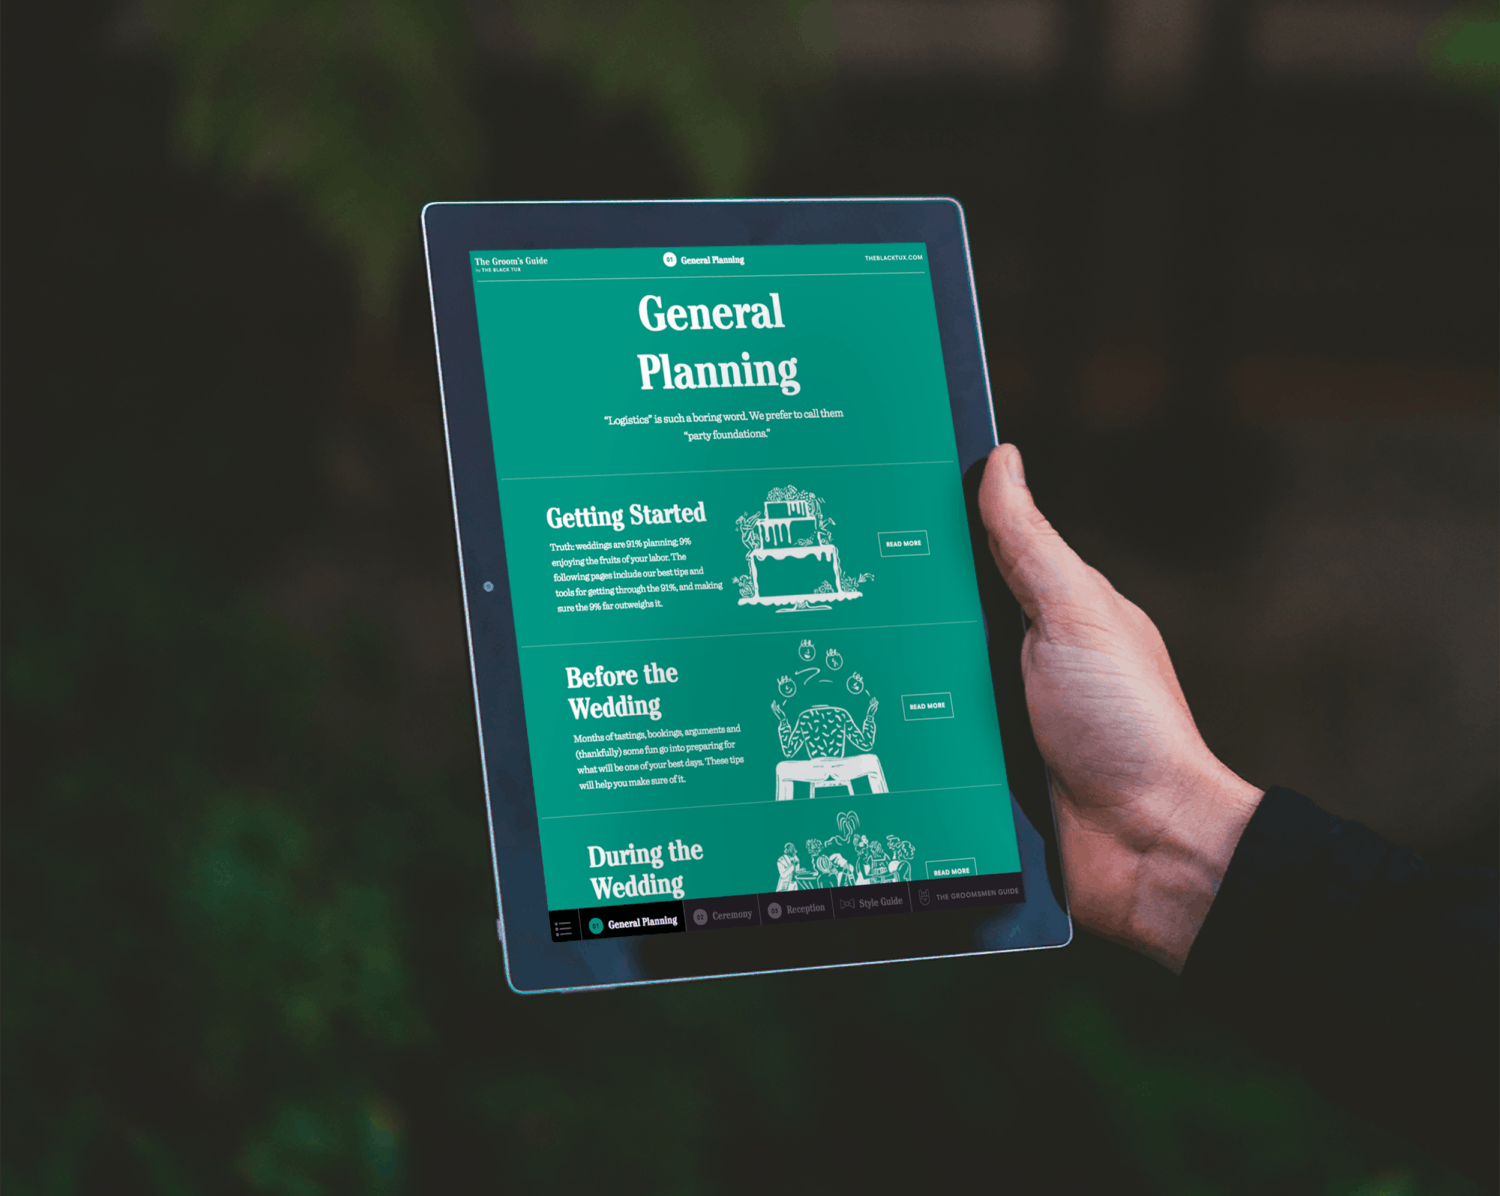 General Planning on an Ipad